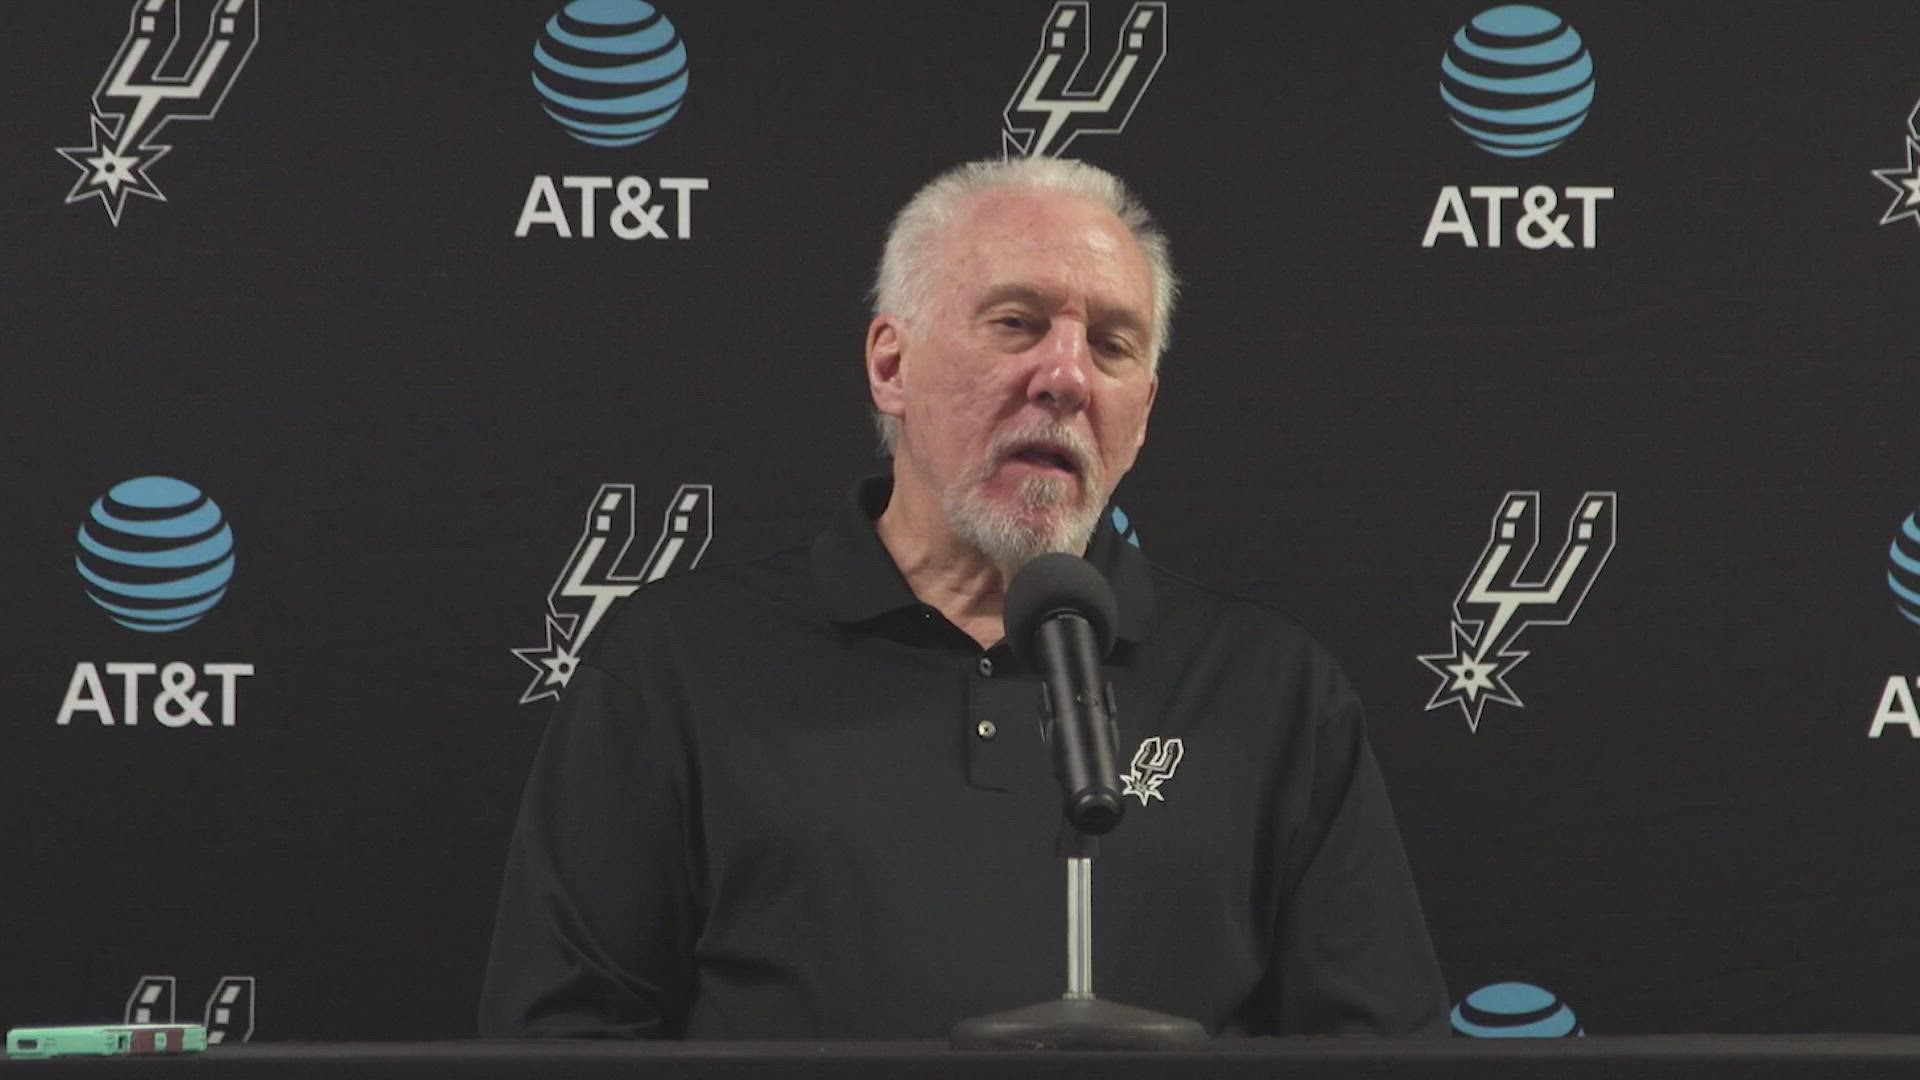 Pop said he joked that if Tim Duncan had played better he would've got the record sooner, and said that the record "belongs to a whole lot of people."